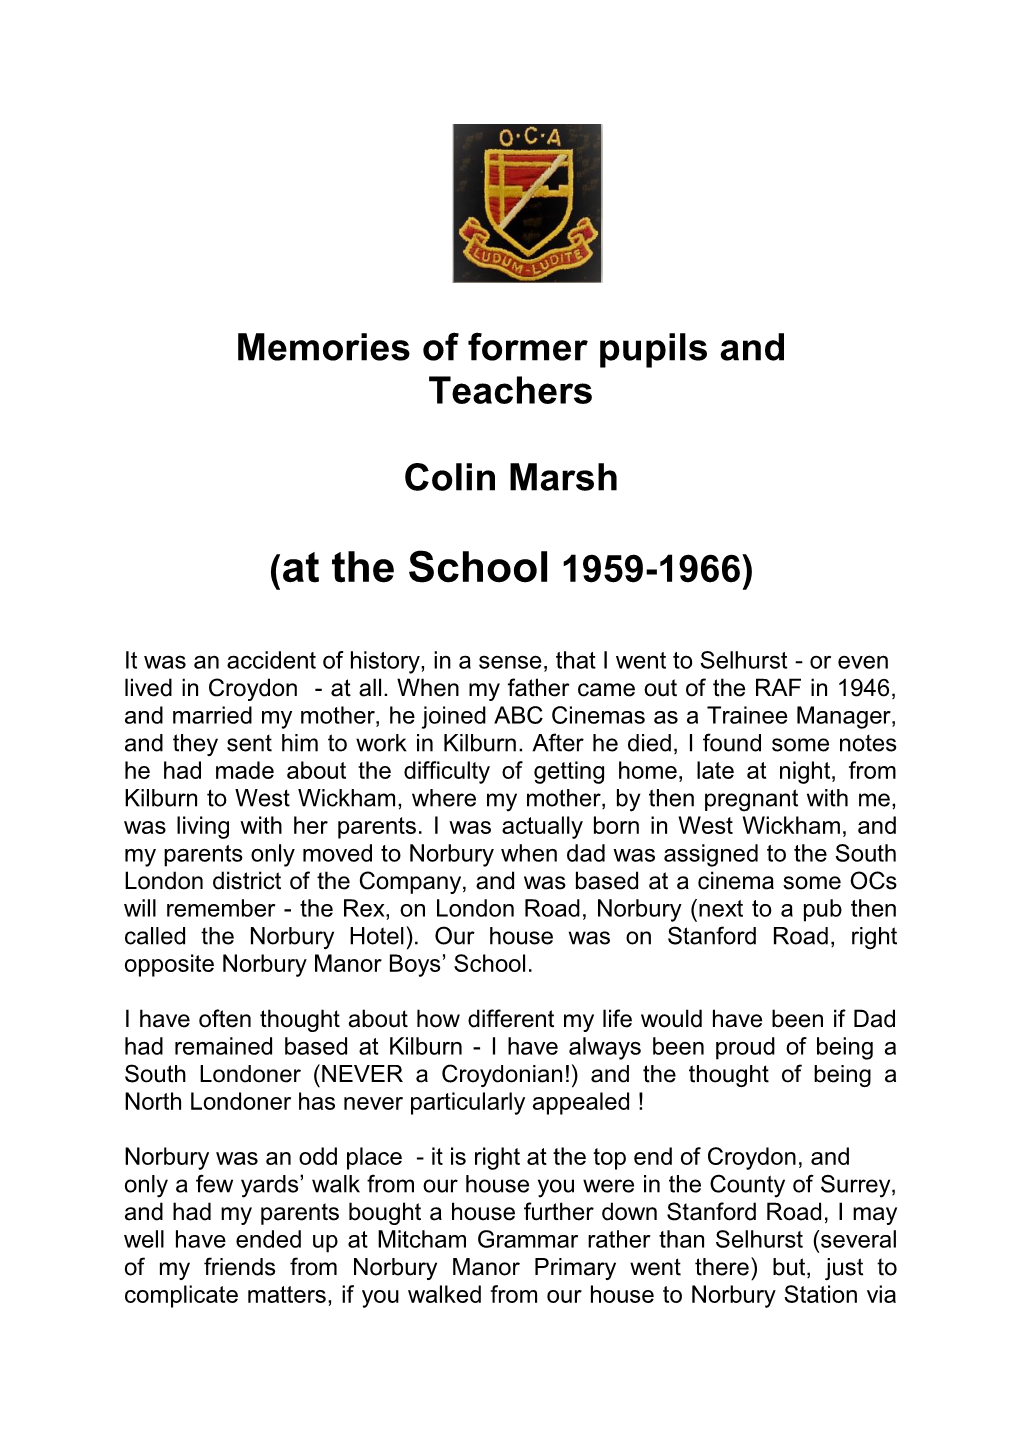 Memories of Former Pupils and Teachers Colin Marsh (At the School 1959-1966)